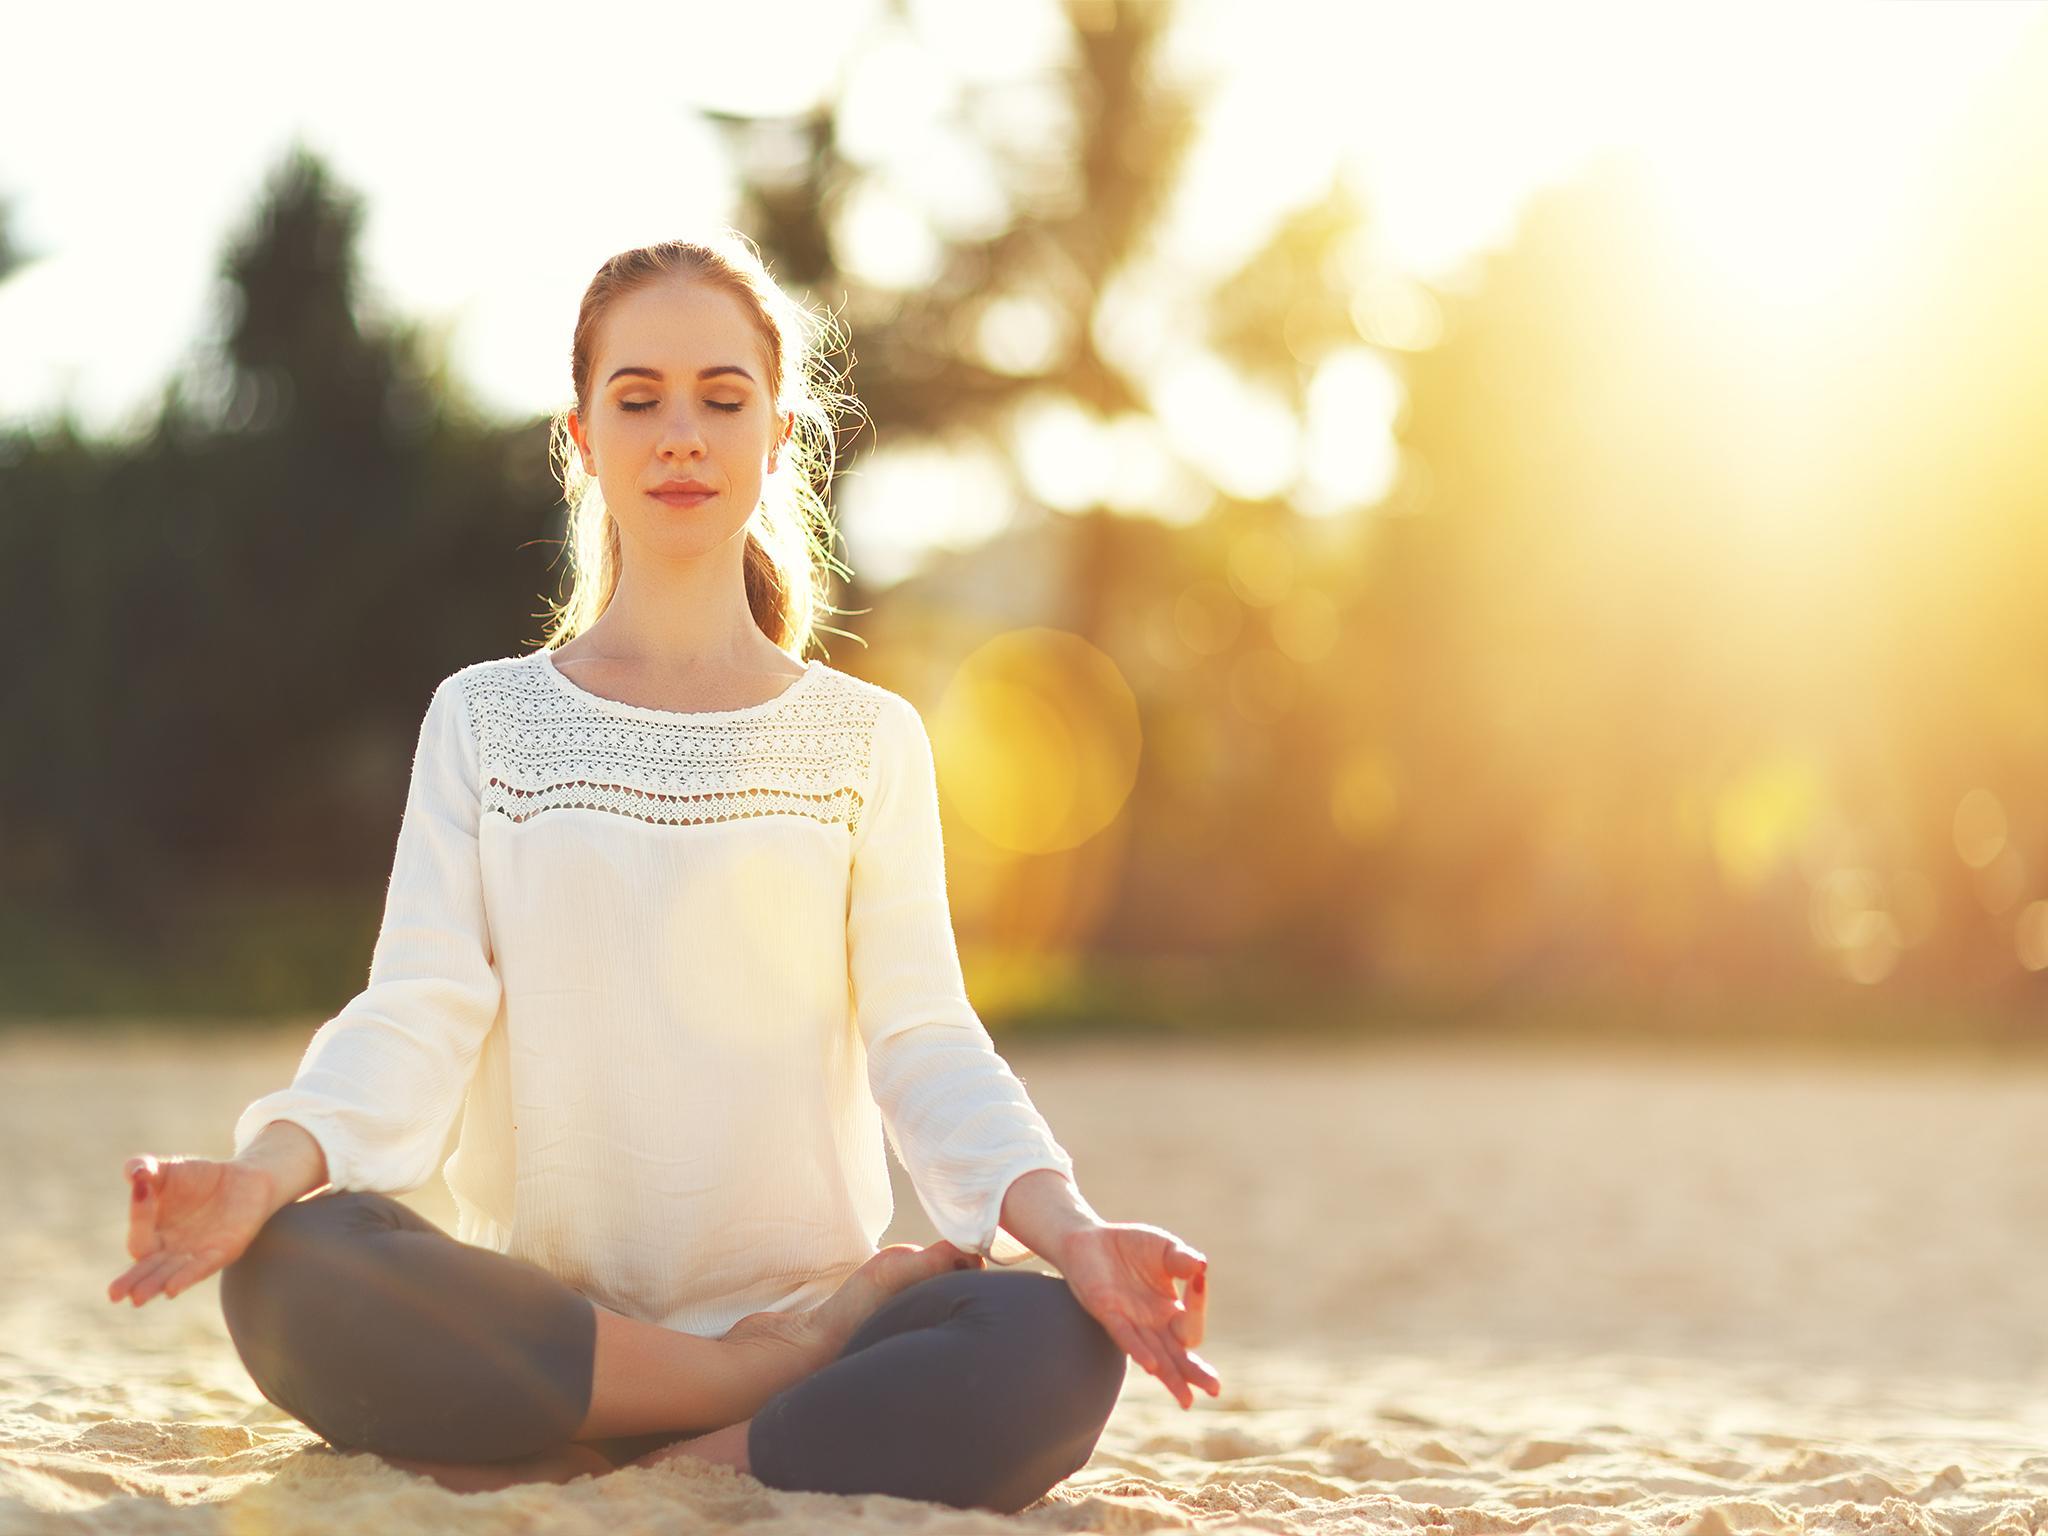 Research suggests meditation can improve brain cognition Shutterstock/Evgeny Atamanenko